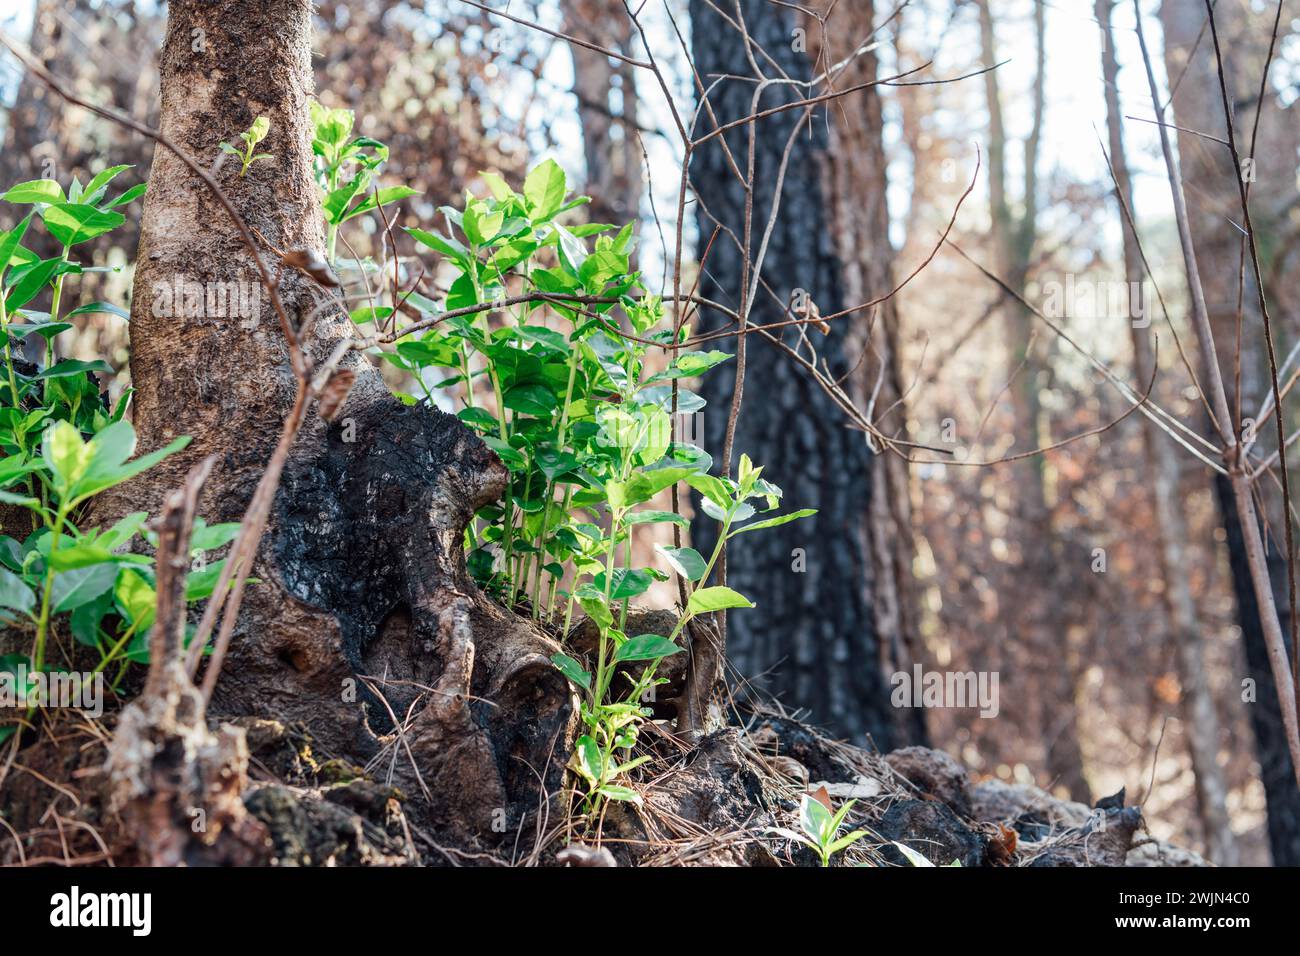 Green plant growing in a burned pine forest Stock Photo